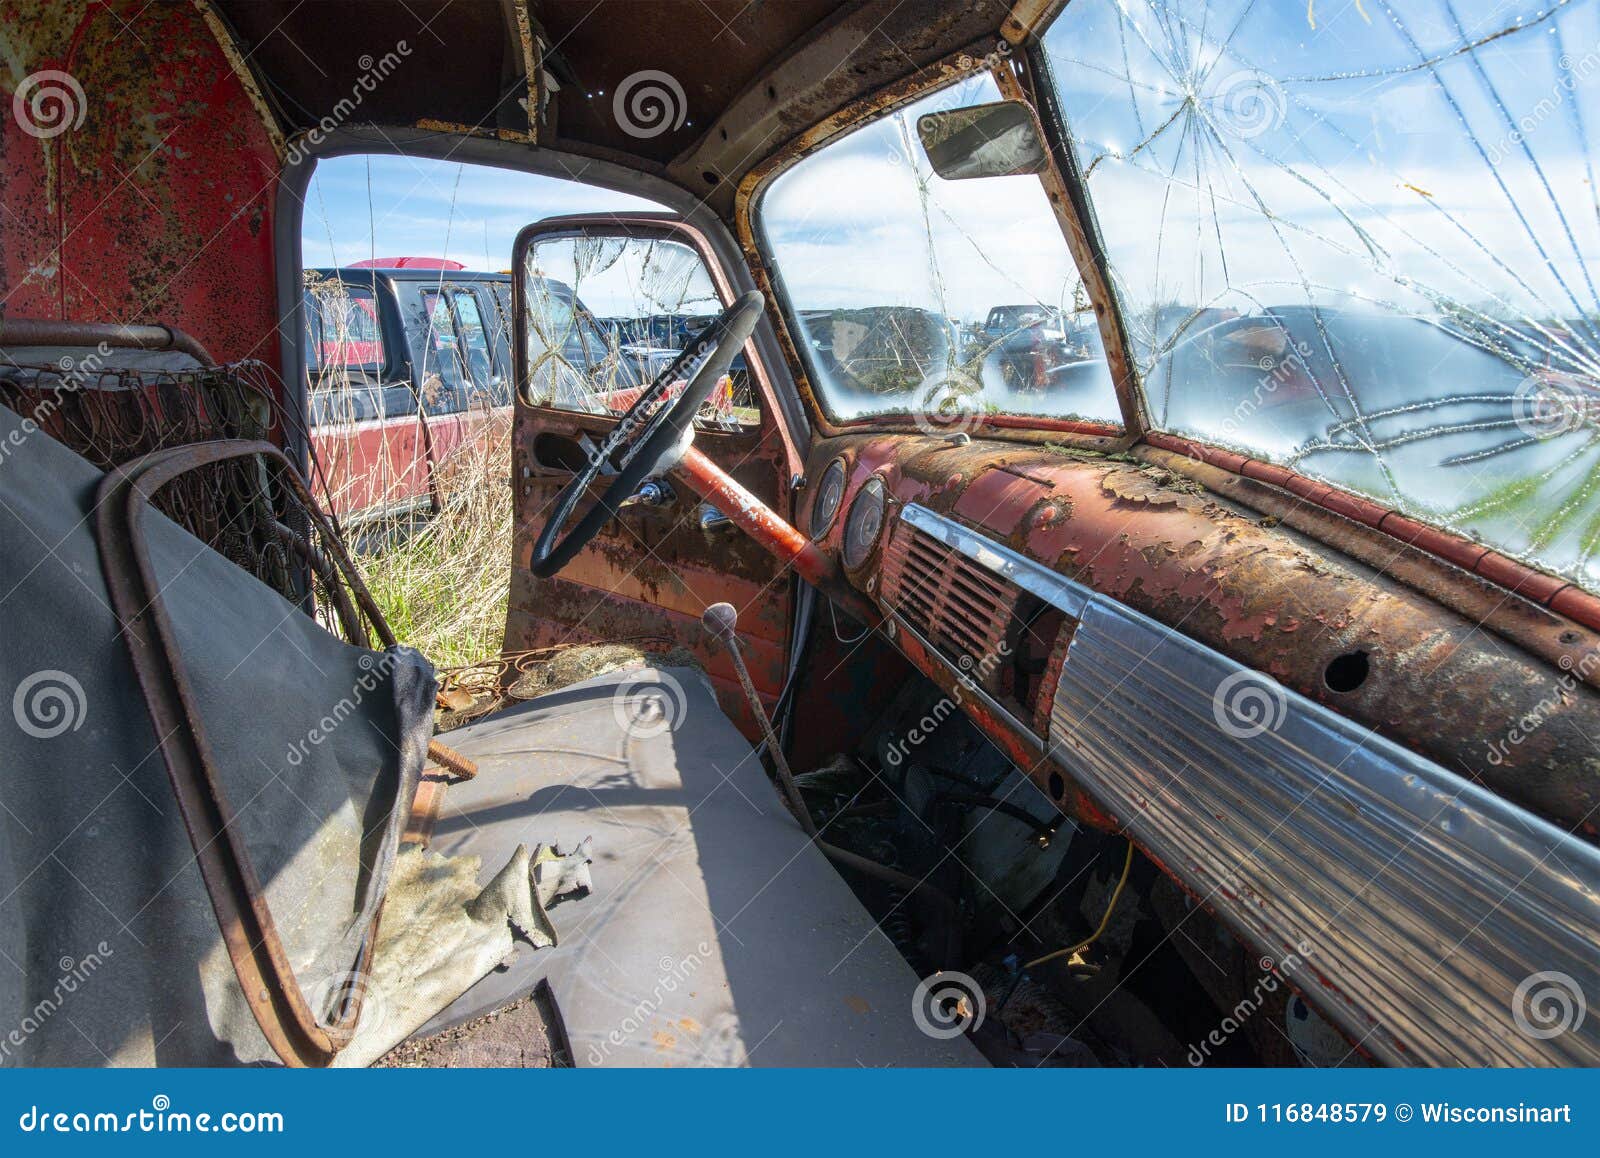 Vintage Classic Chevy Truck Interior Pickup Stock Image